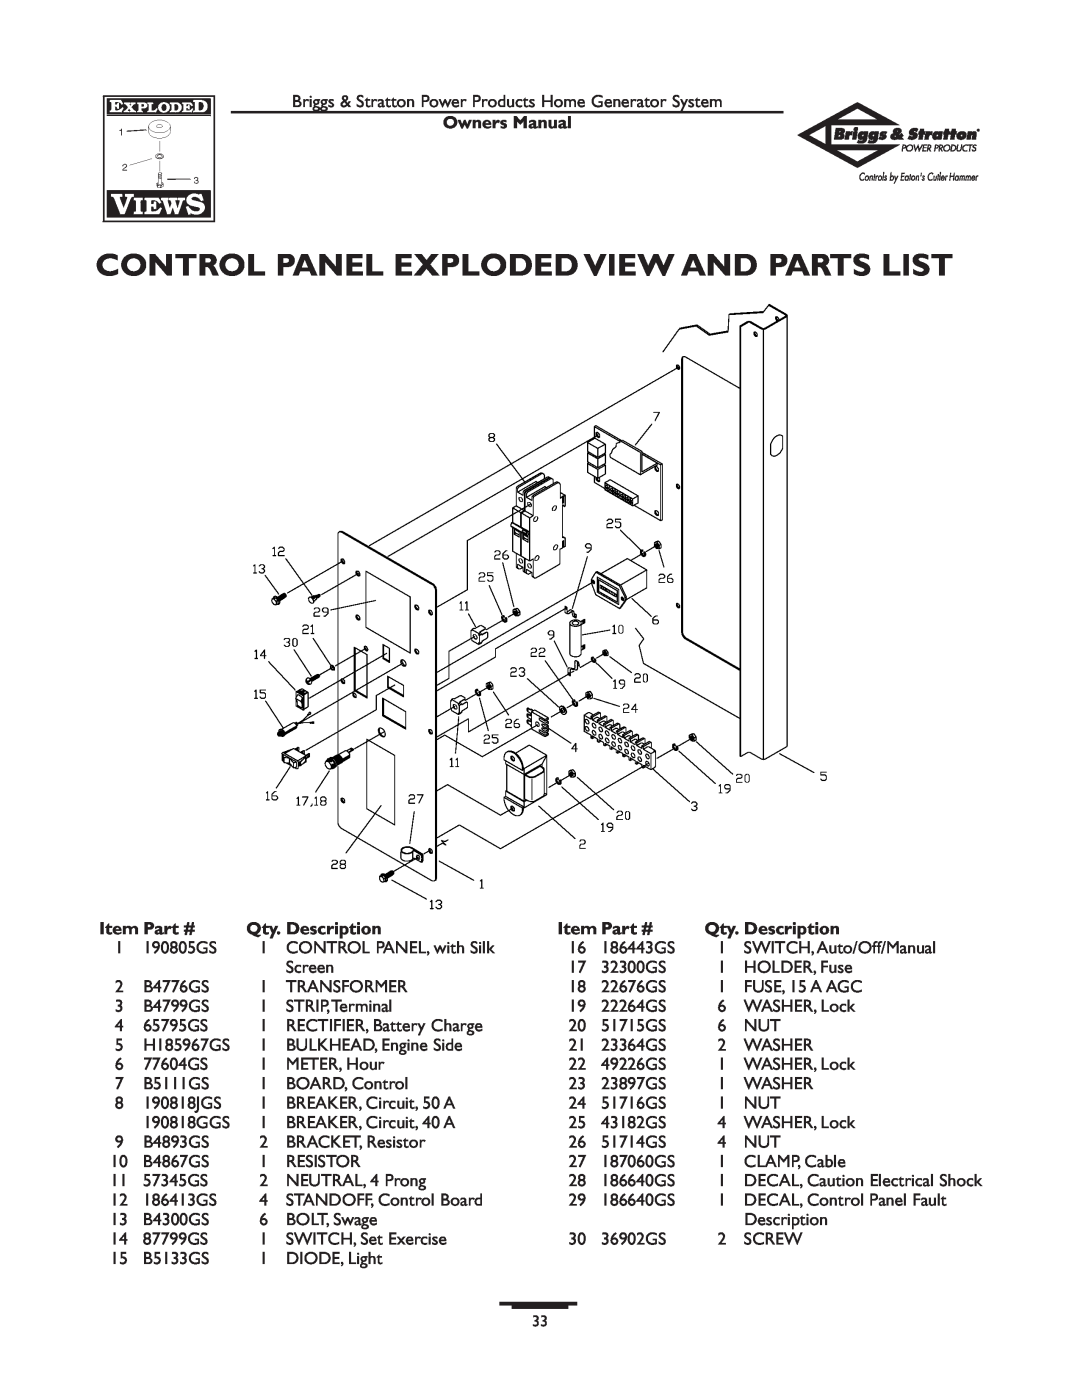 Briggs & Stratton 1679-0 Control Panel Exploded View And Parts List, Owners Manual, Item Part #, Qty. Description 